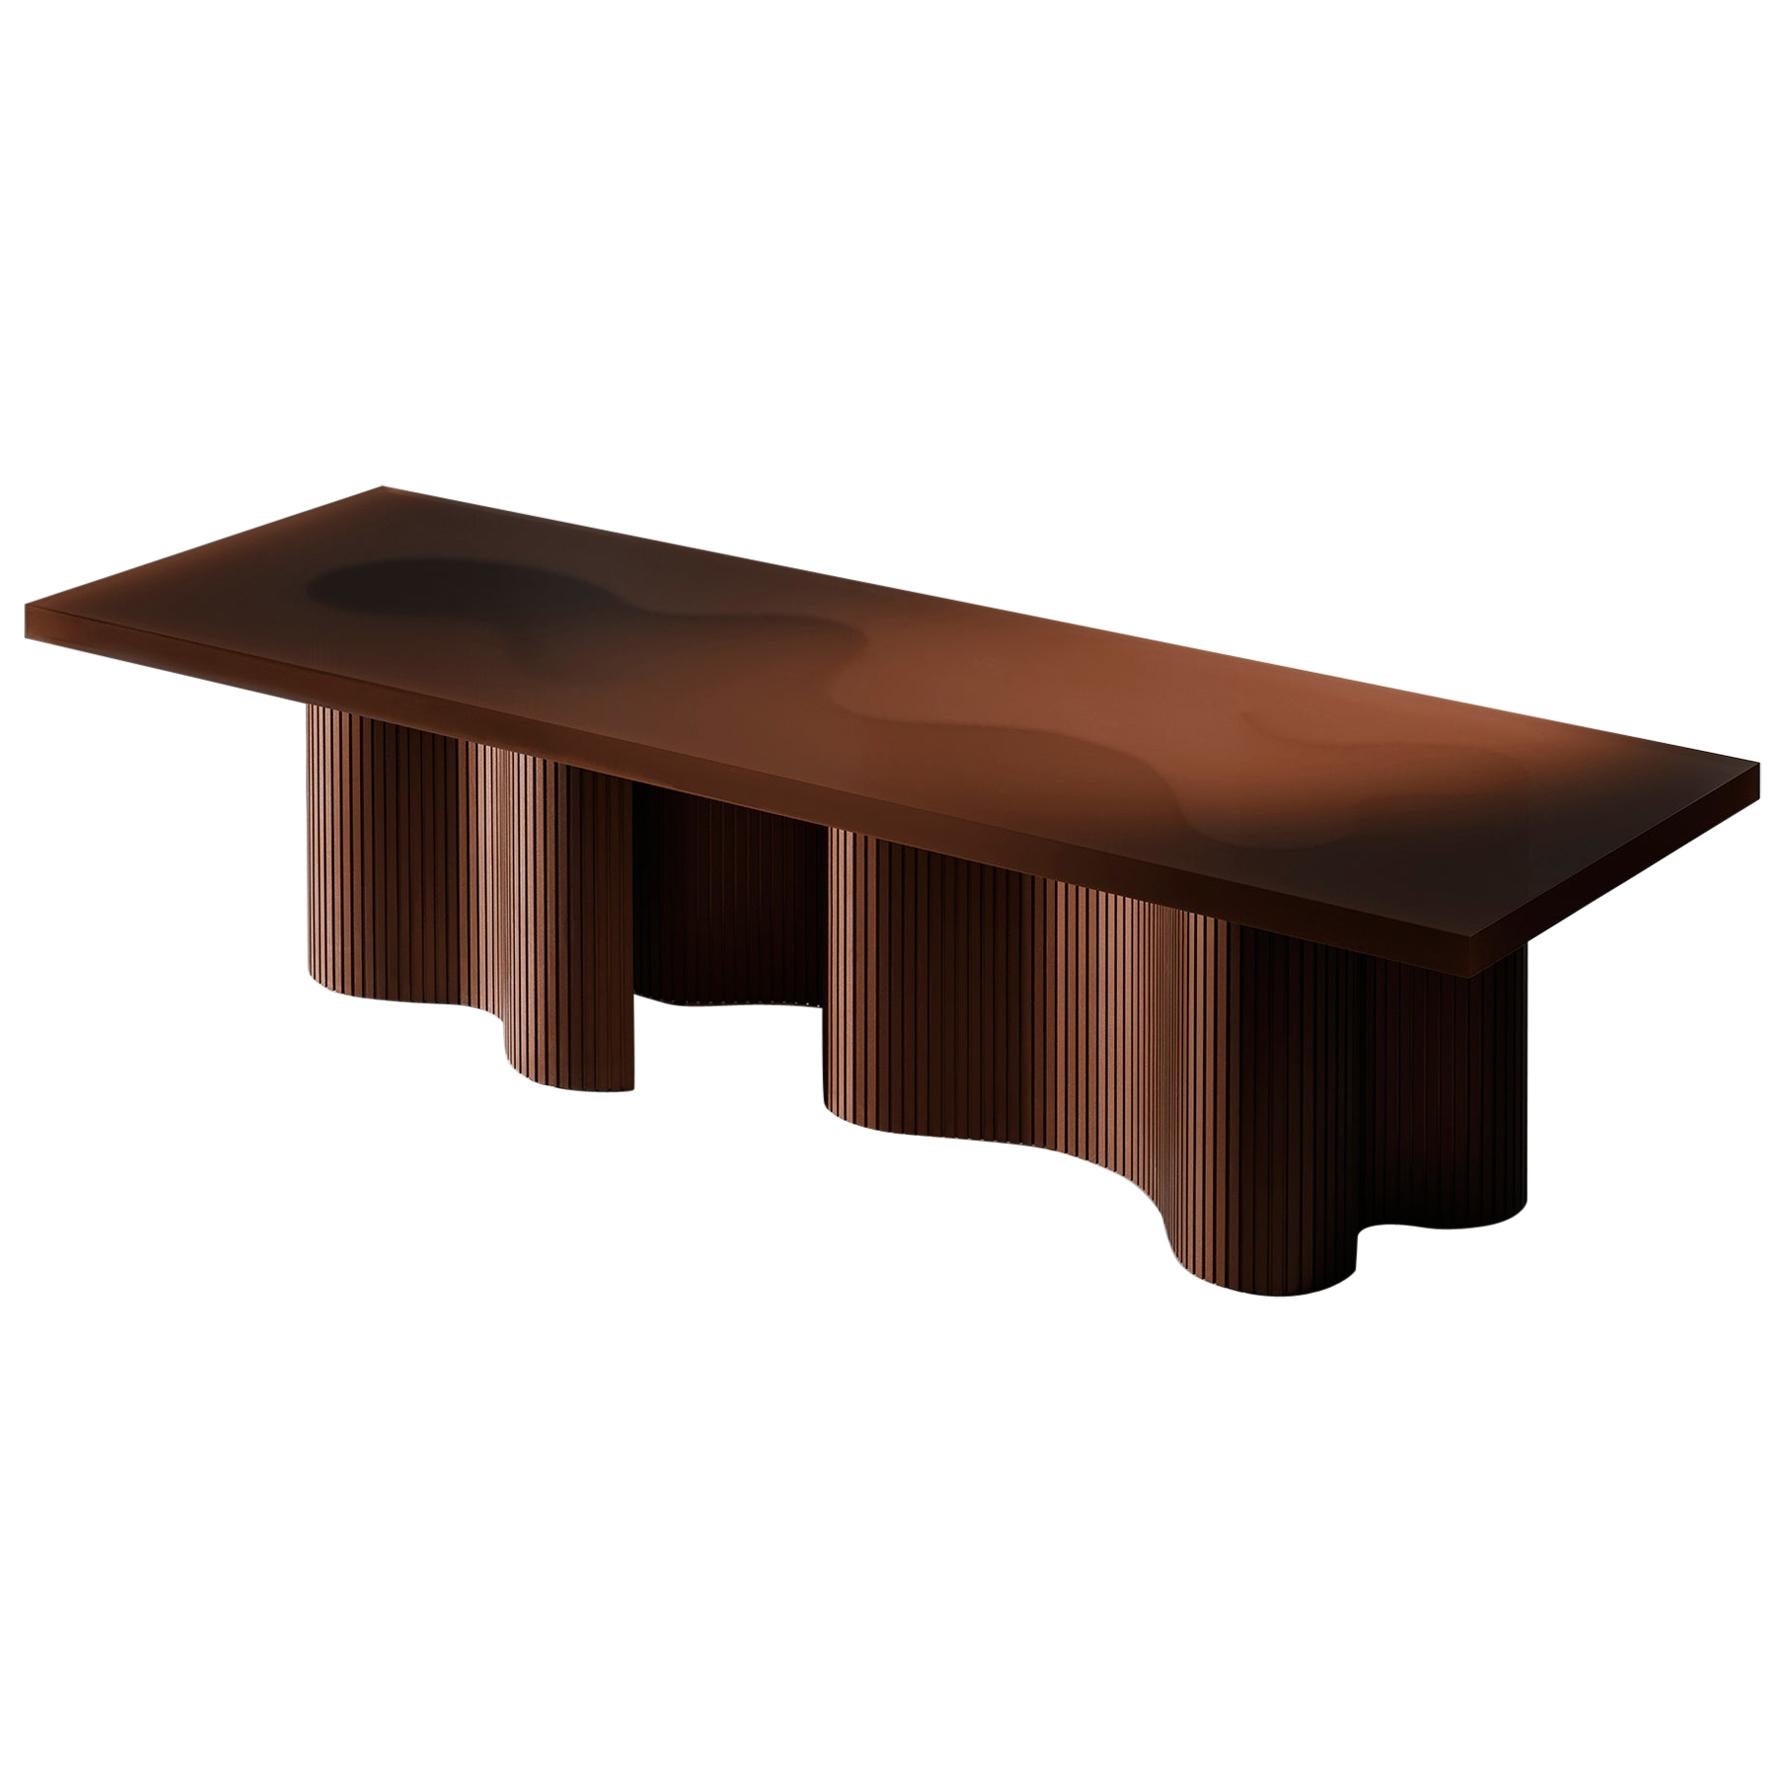 Contemporary Resin Coffee Table, Brown Polished Spine Table, by Erik Olovsson